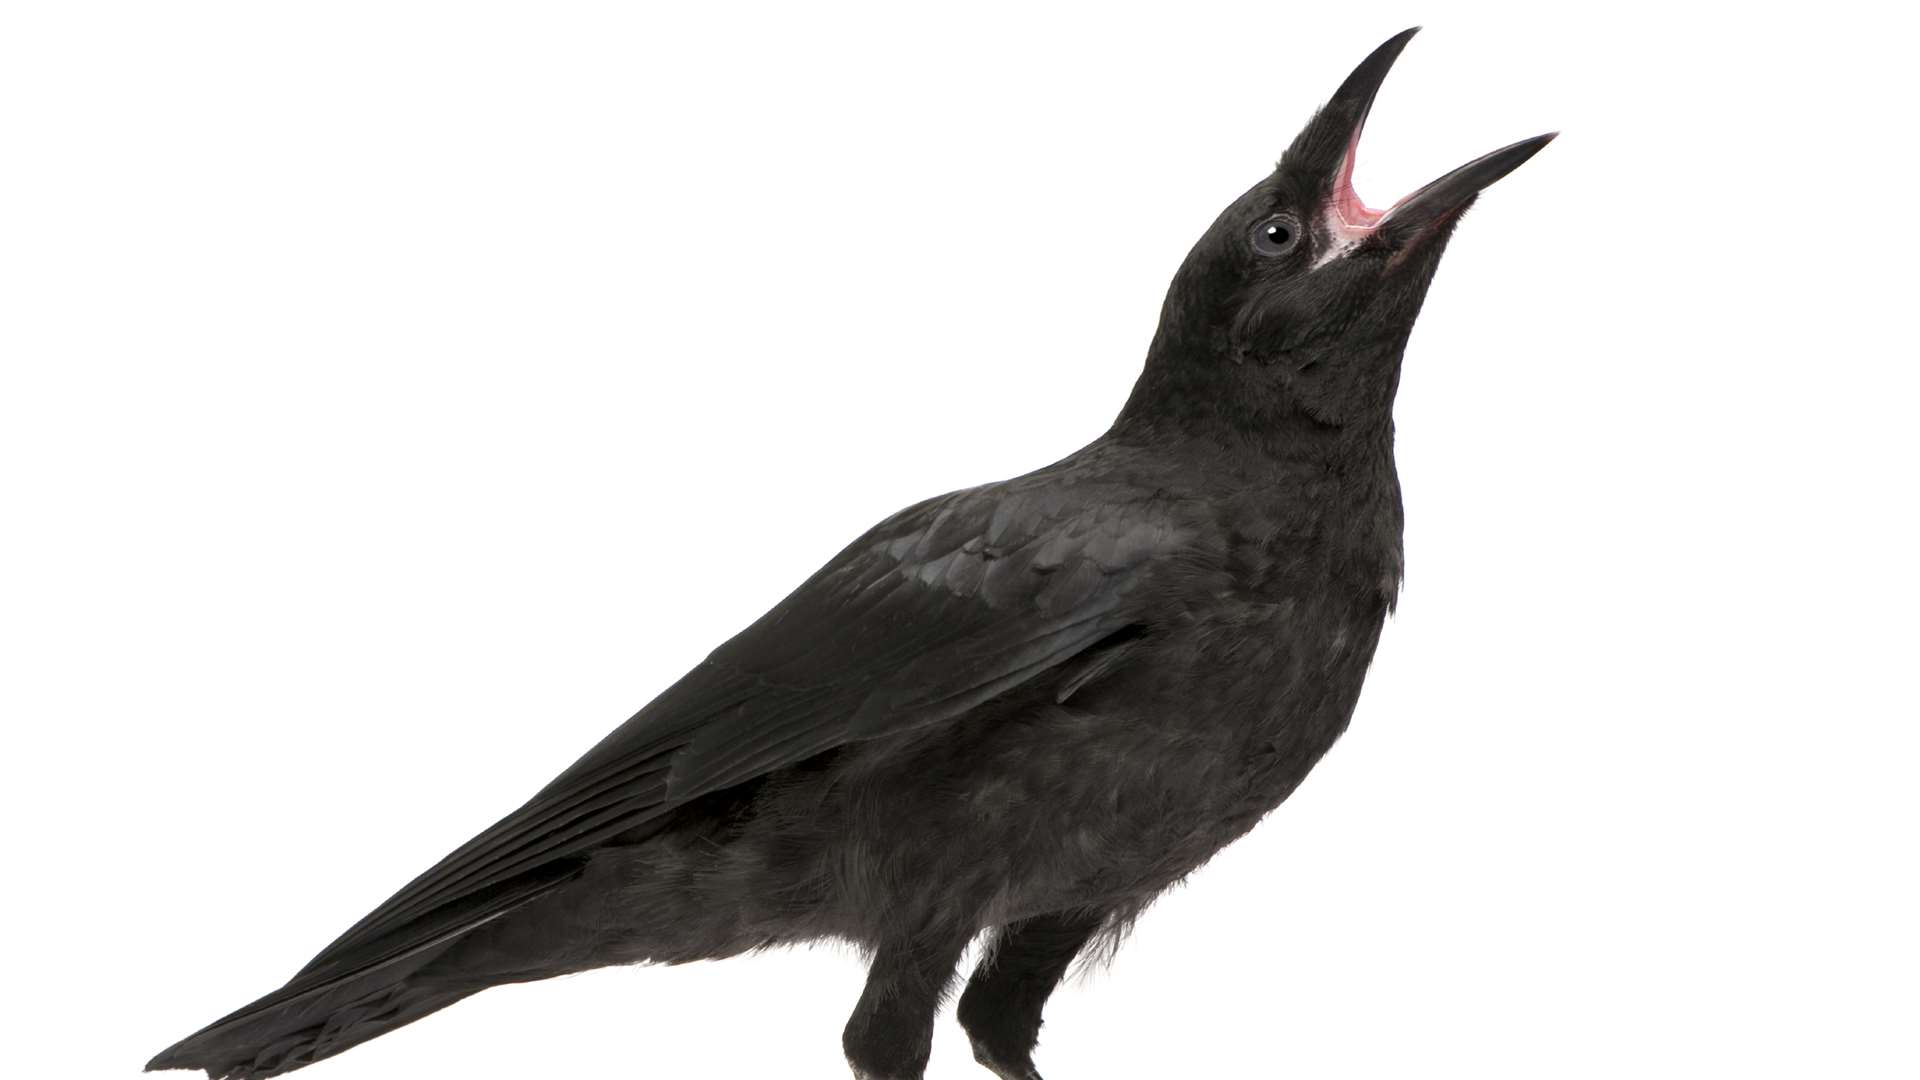 Crows were left flightless after eating treated seeds in Lydd.